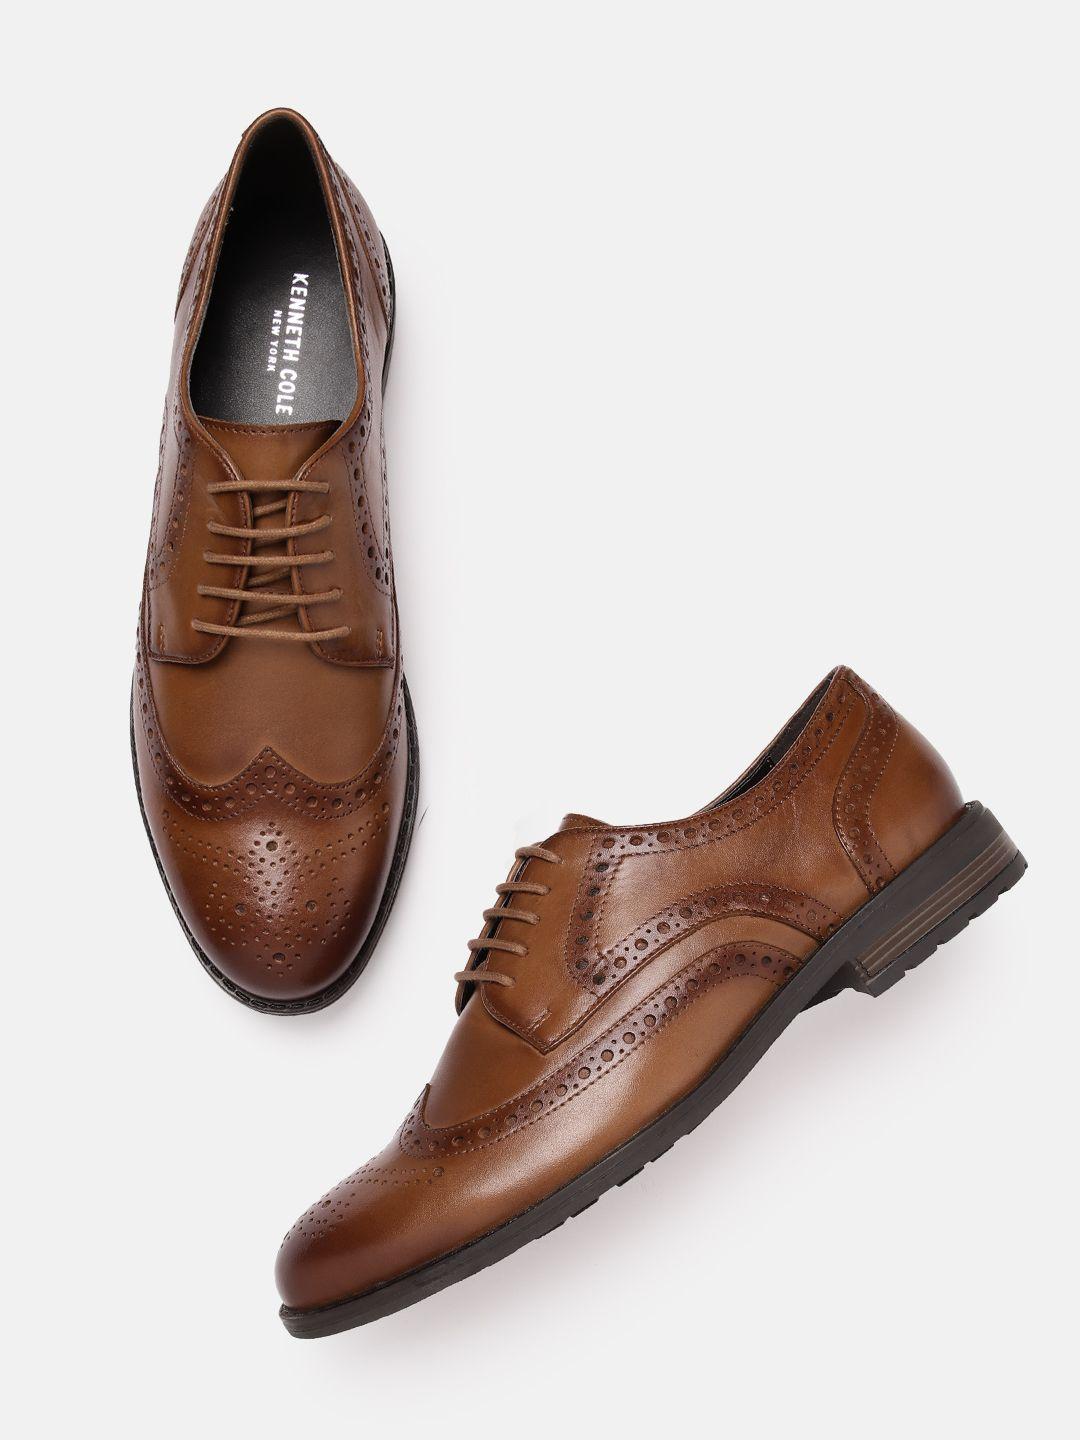 kenneth-cole-men-lace-up-perforated-formal-brogues